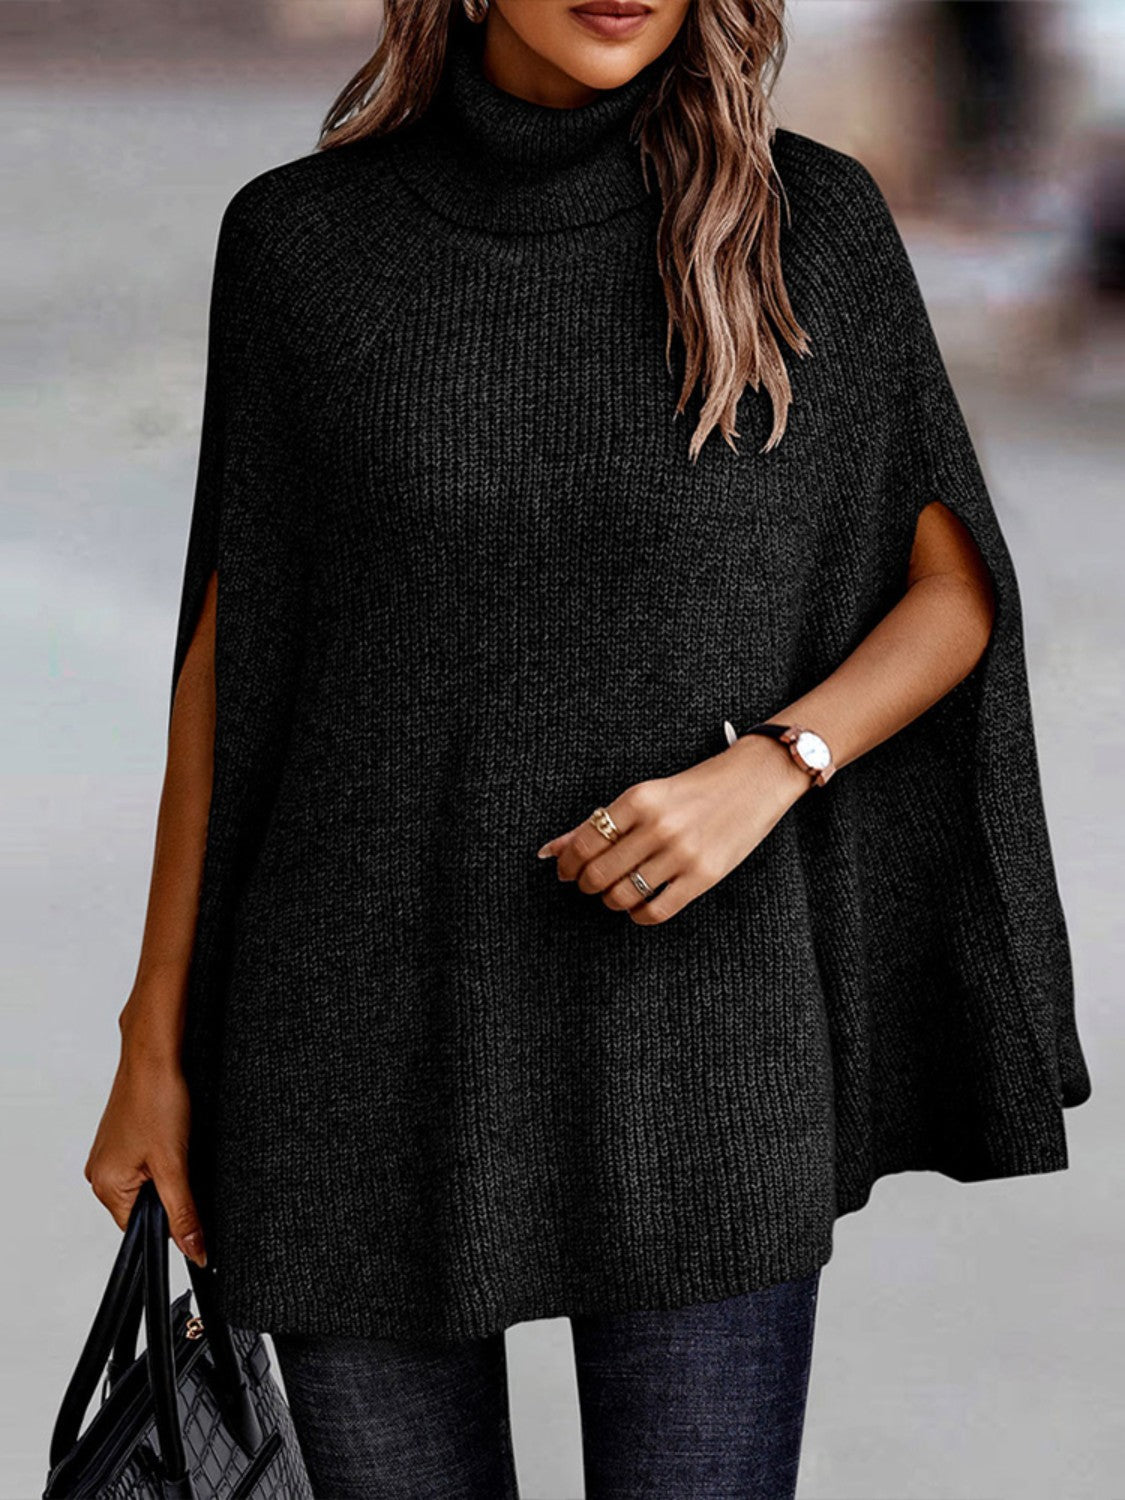 Shea Bought This Dolman Sleeve Poncho